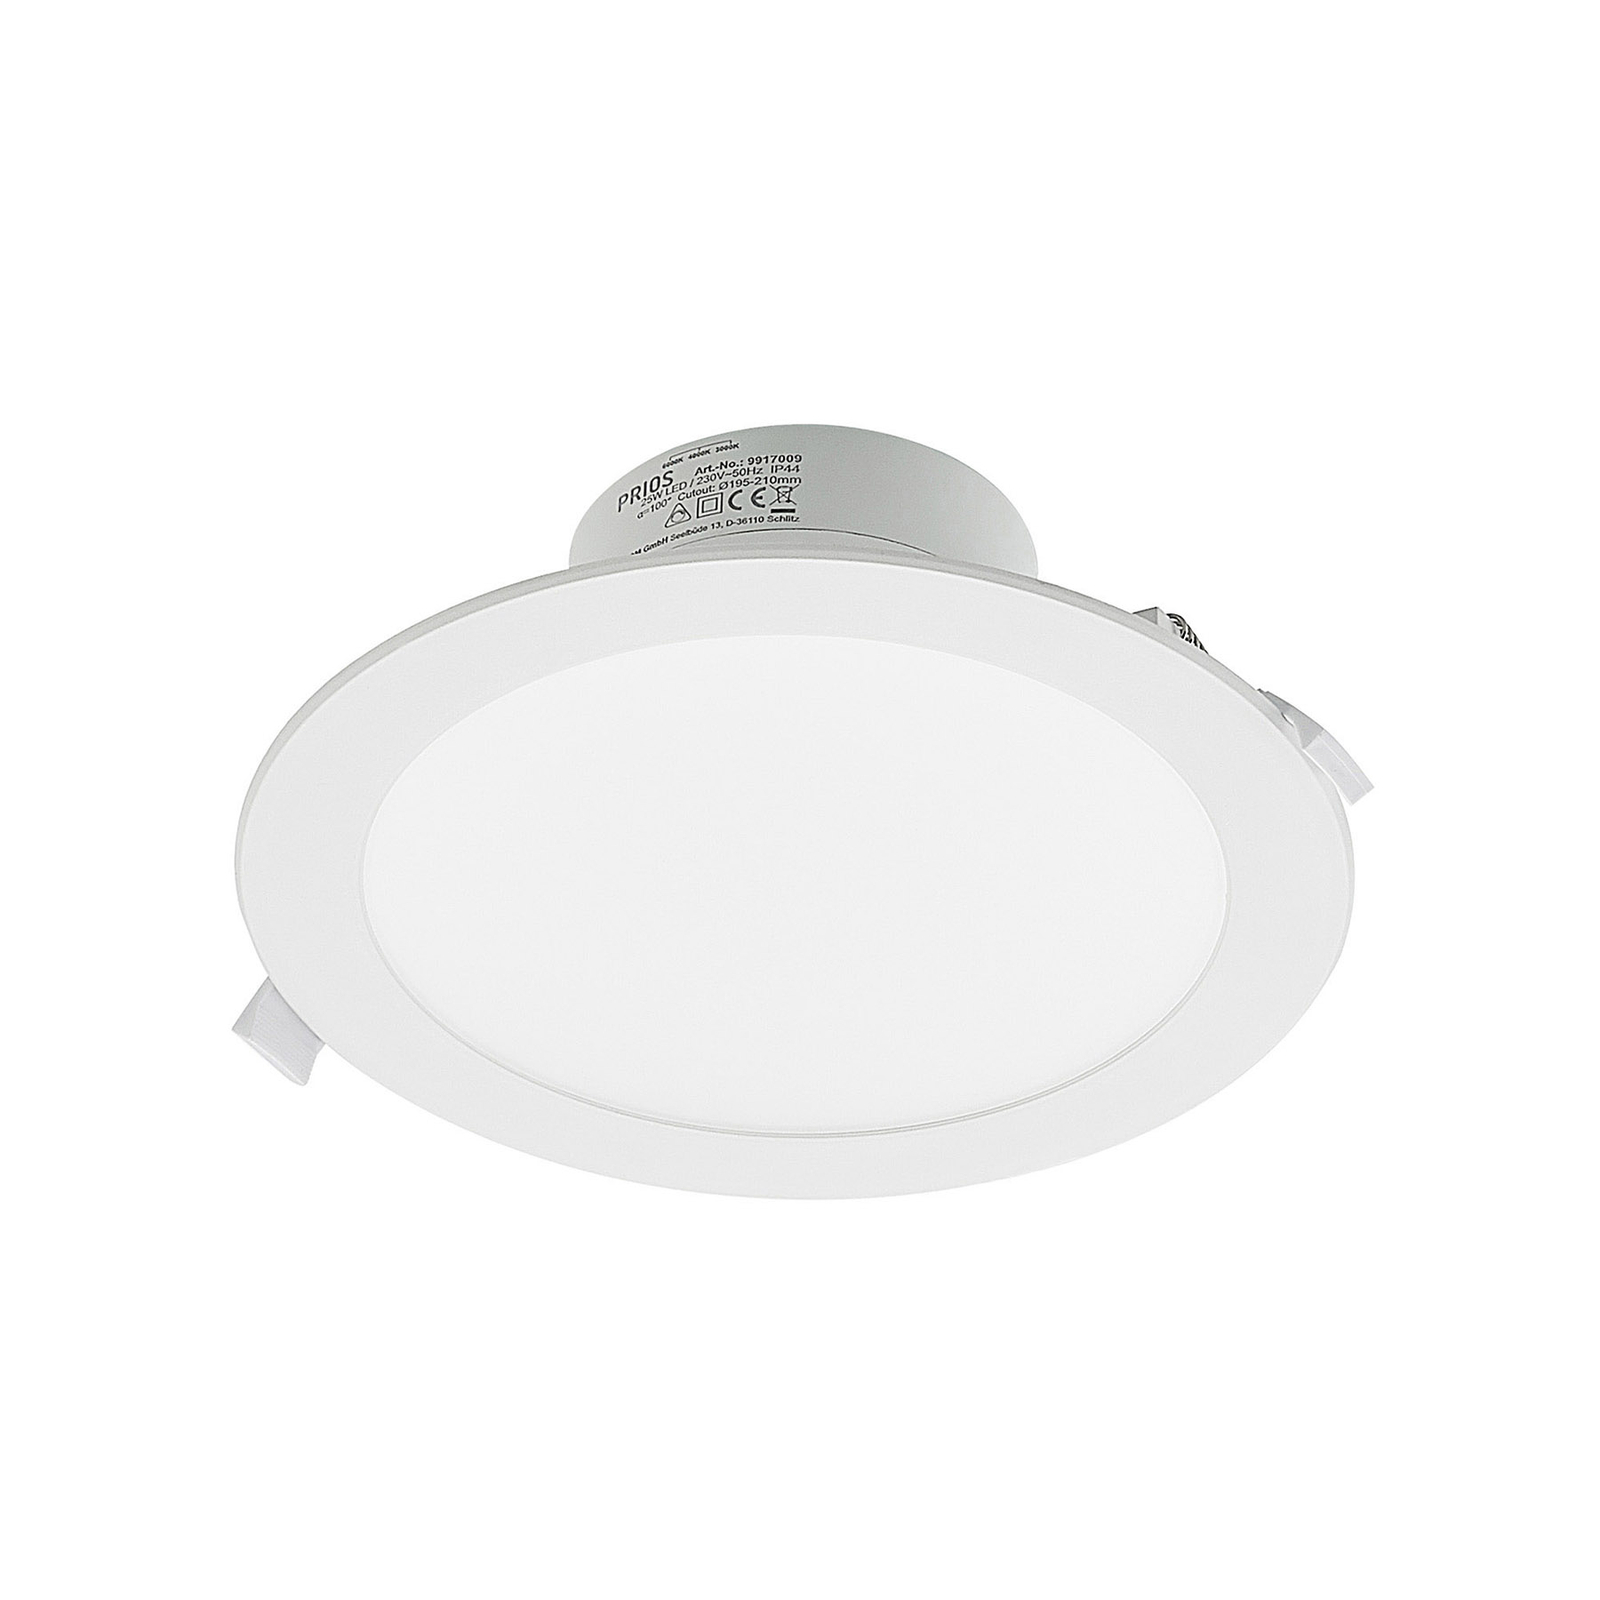 Prios LED recessed light Rida, 22.5cm, 25W, 10pcs, CCT, dimmable